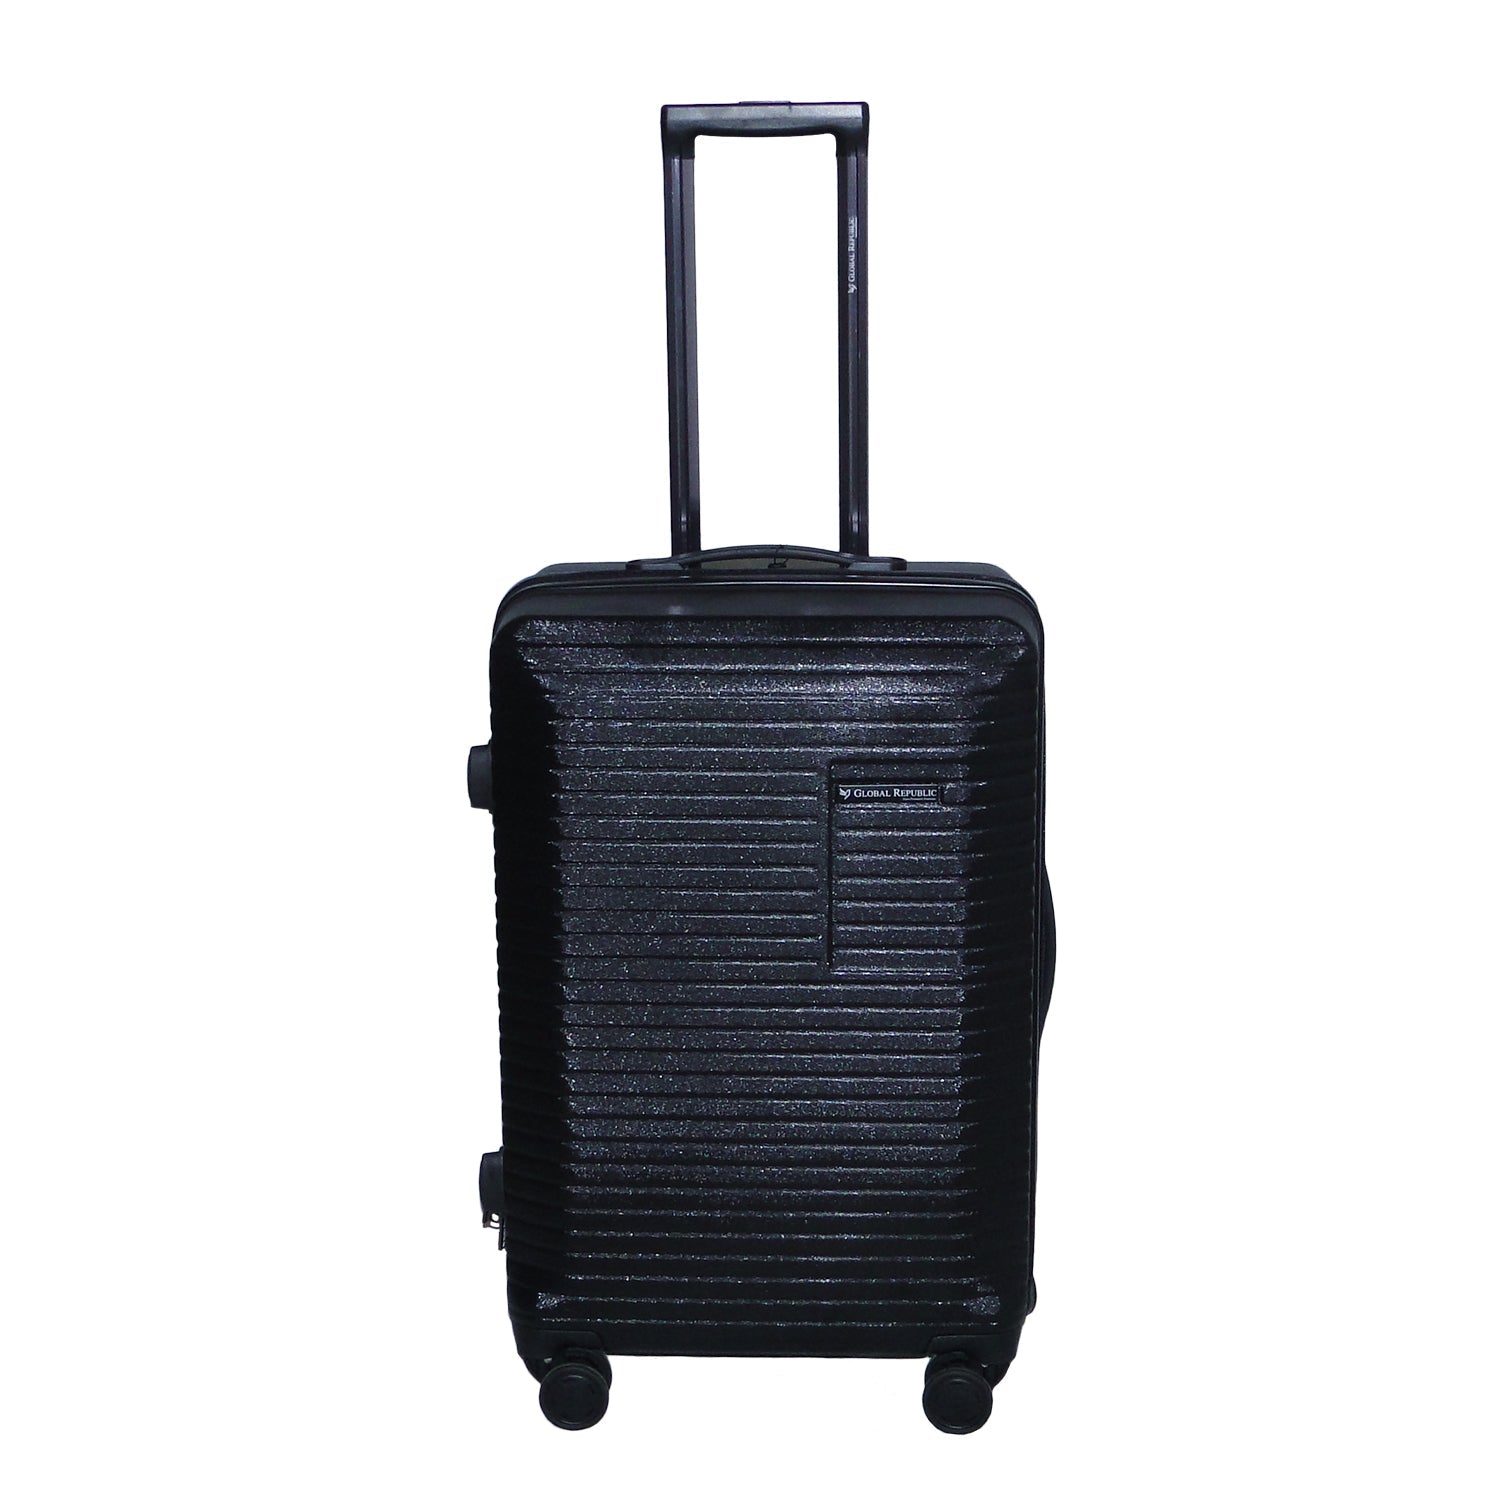 Cabin Size Light Polycarbonate Trolley Luggage Bags (Black Color)